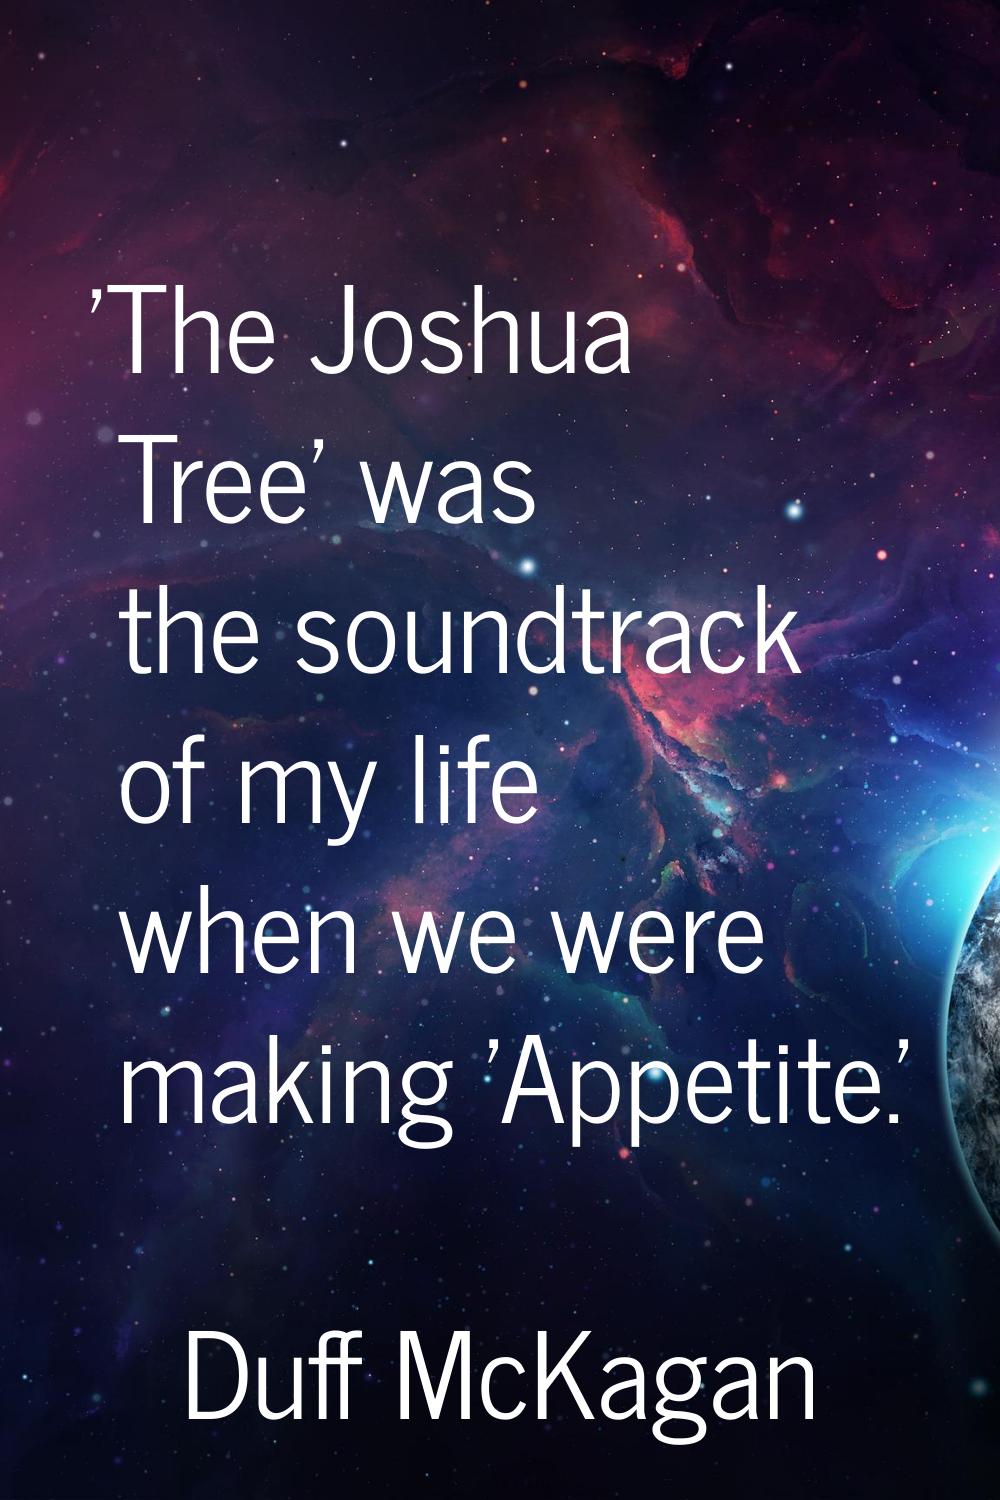 'The Joshua Tree' was the soundtrack of my life when we were making 'Appetite.'